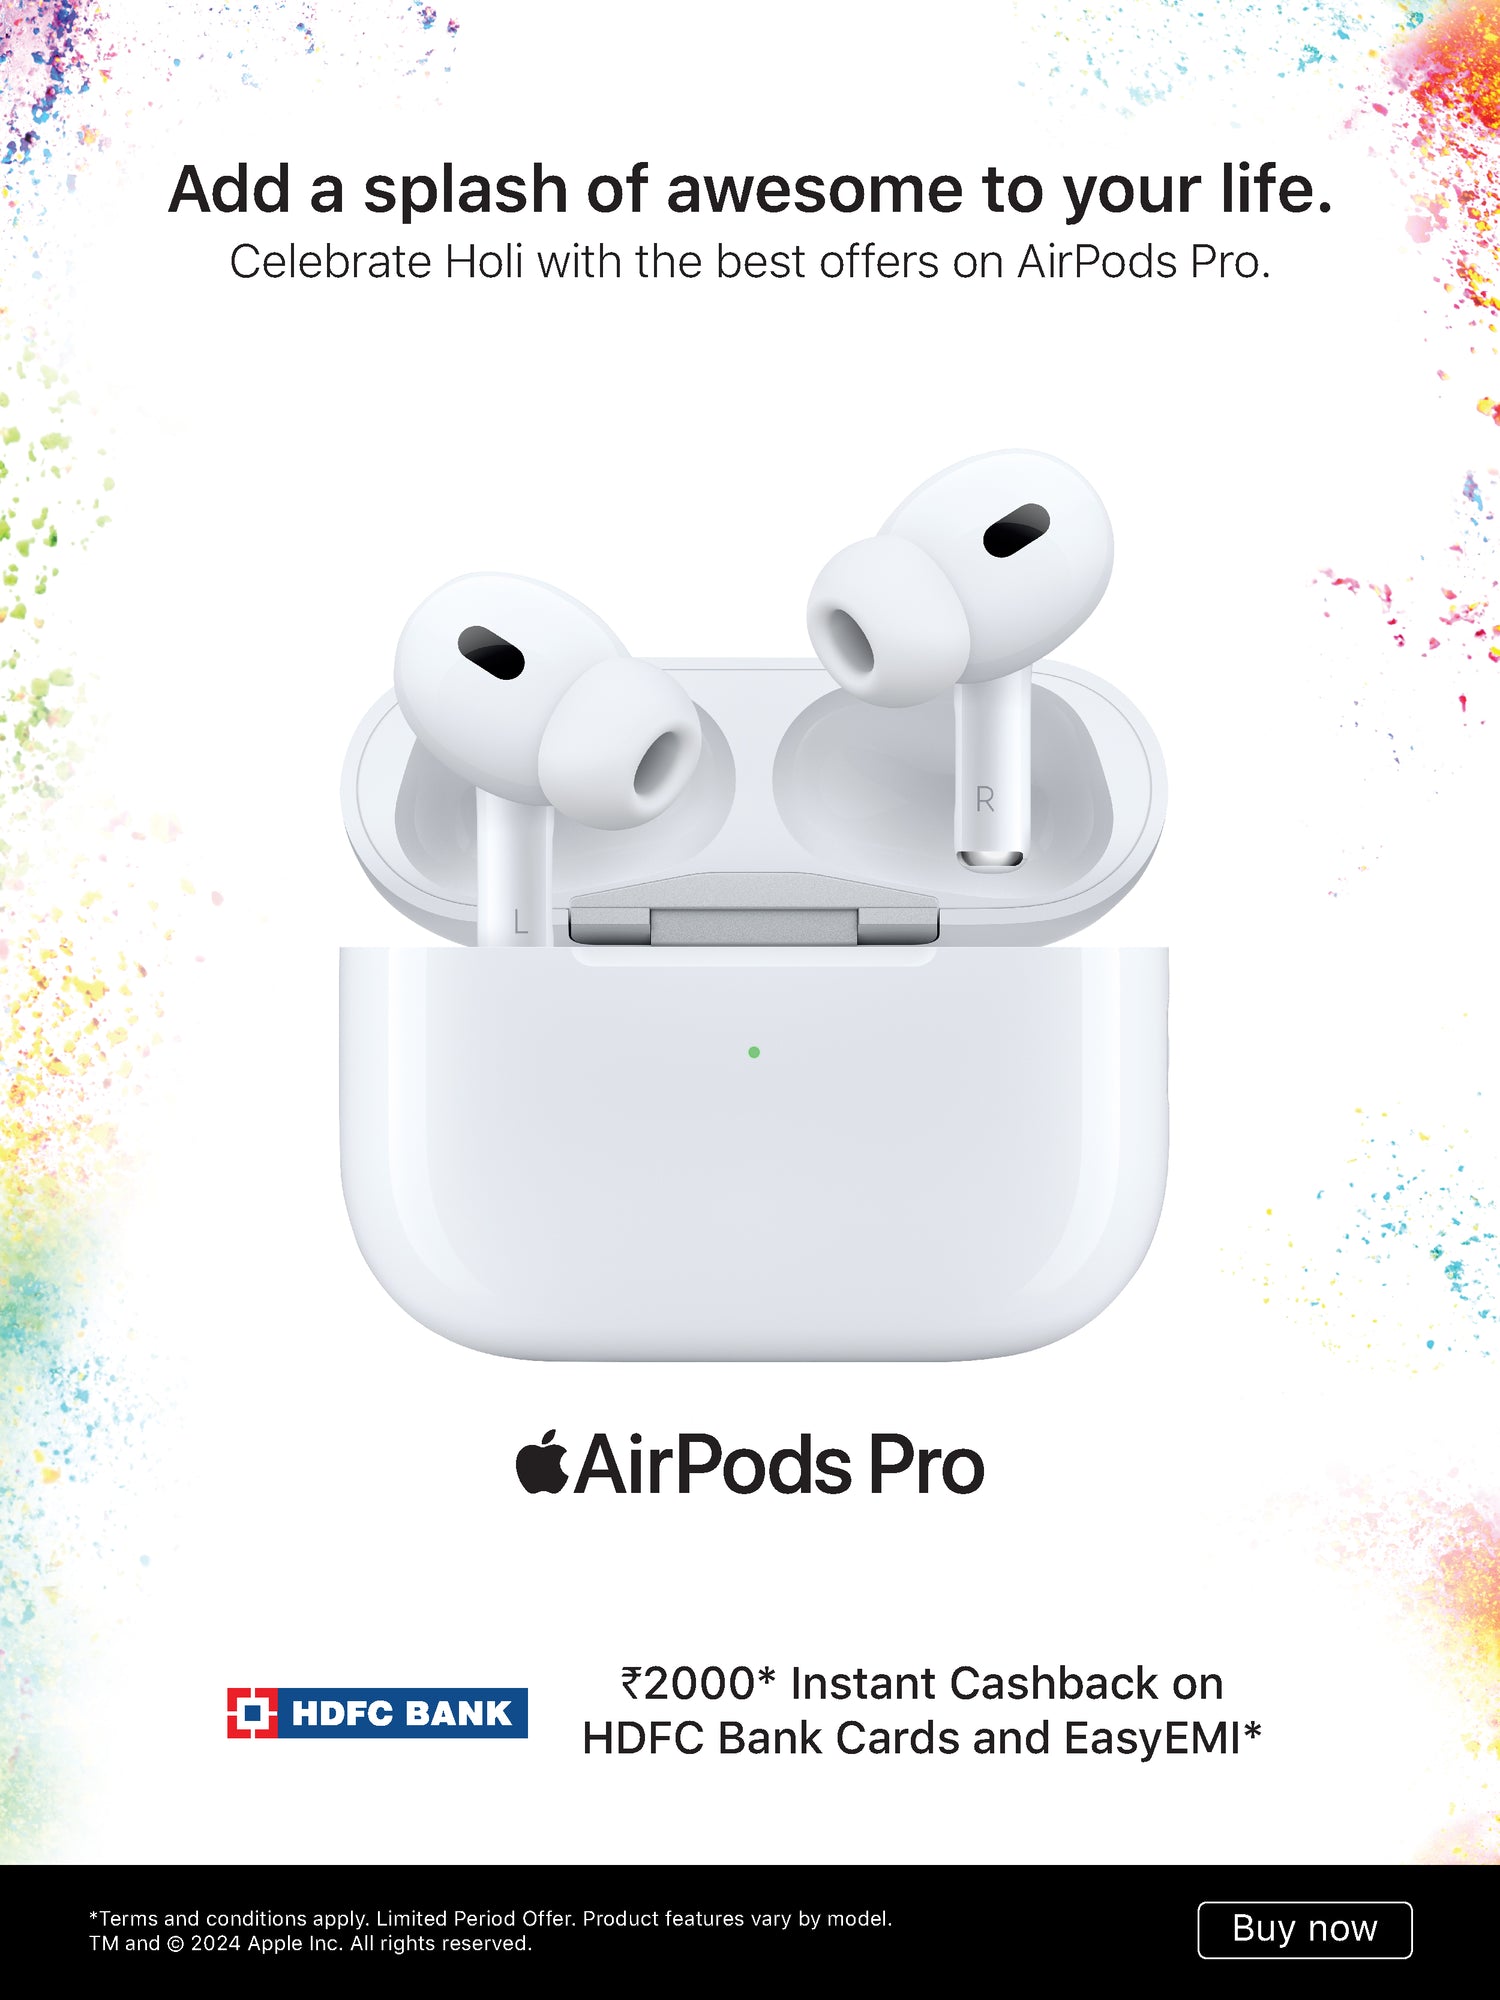 AirPods Pro Mobile 597841b2 cfab 4114 b963